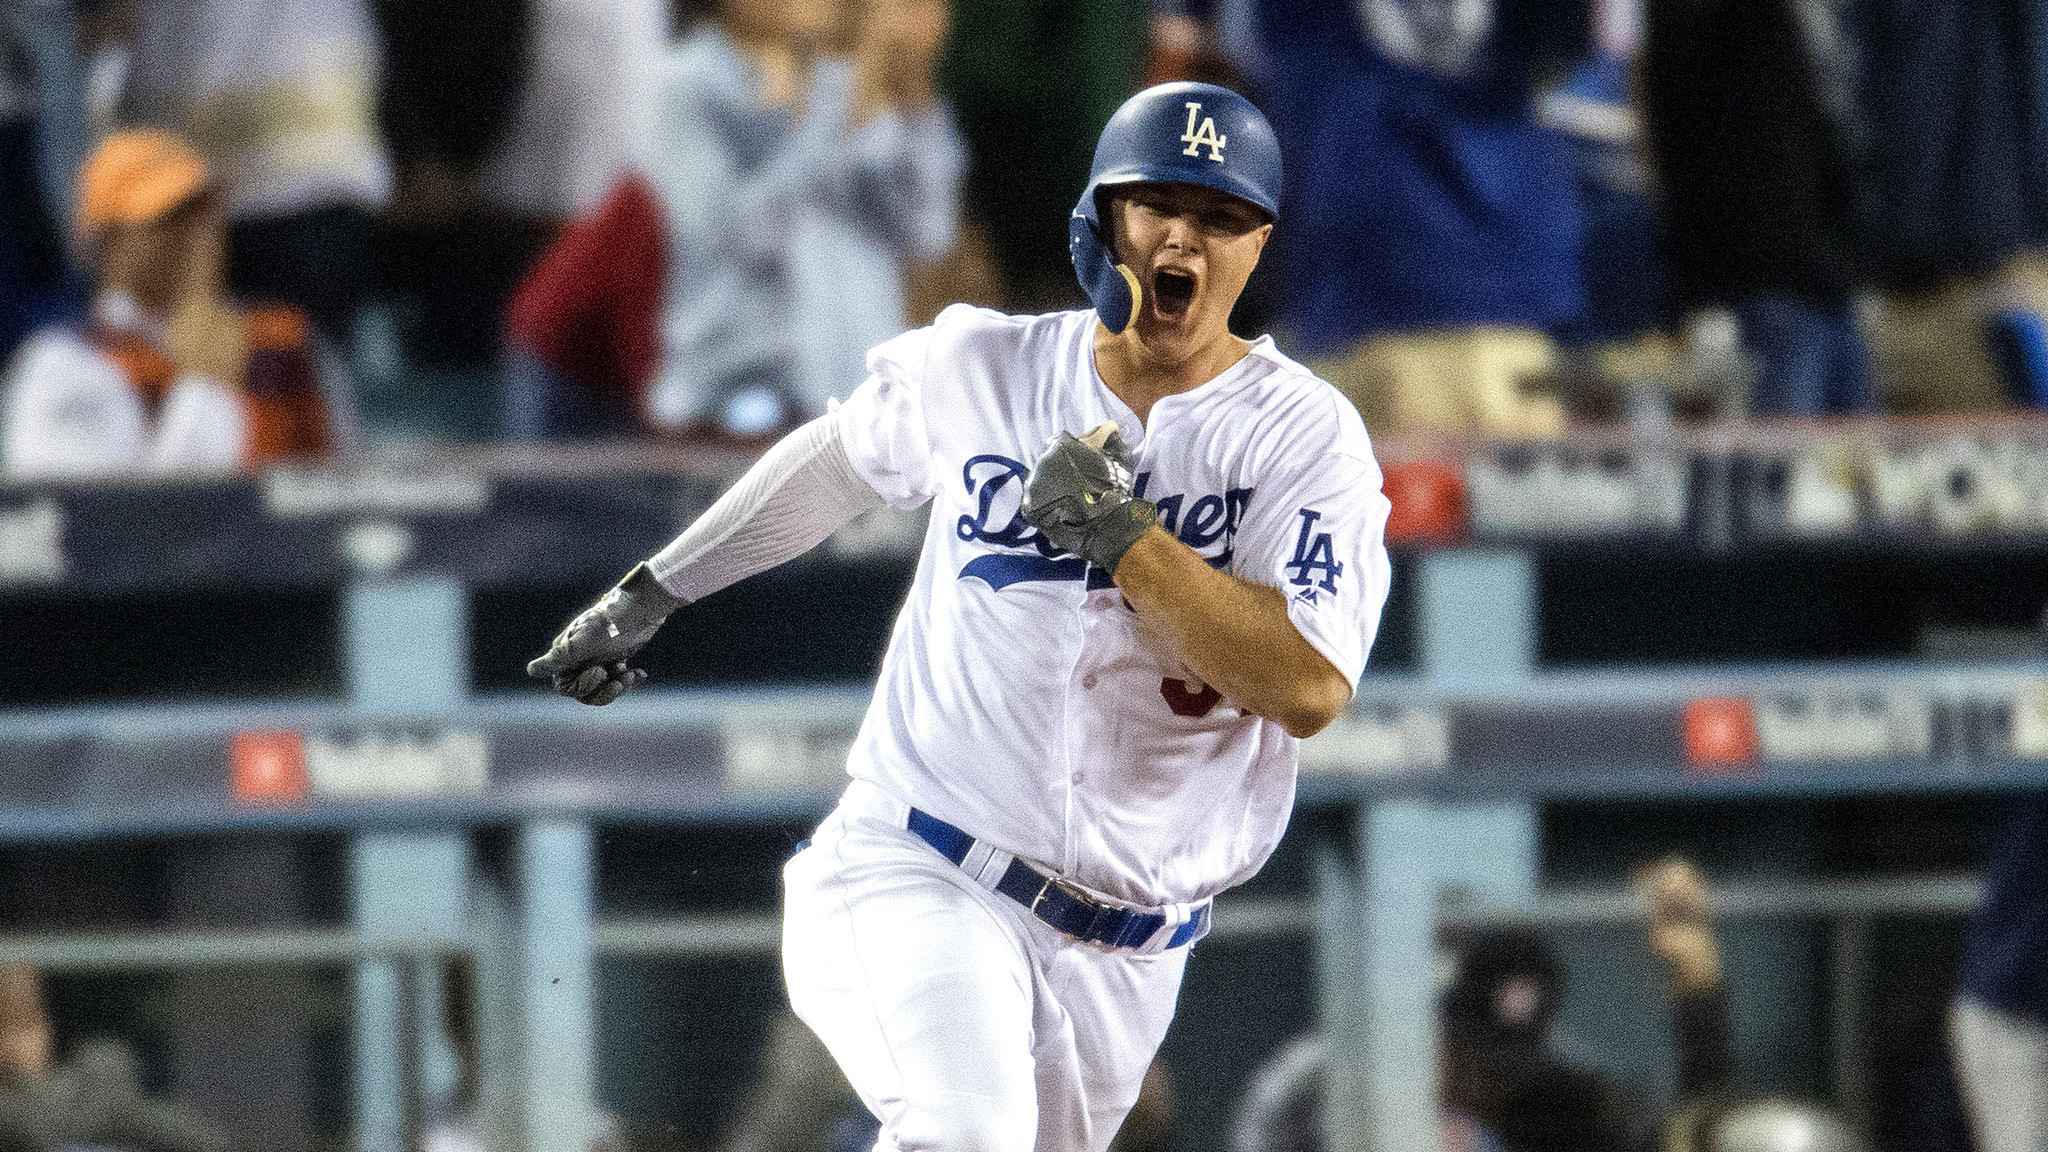 Joc Pederson's season included a stint in triple-A, and now 3 World Series home runs ...